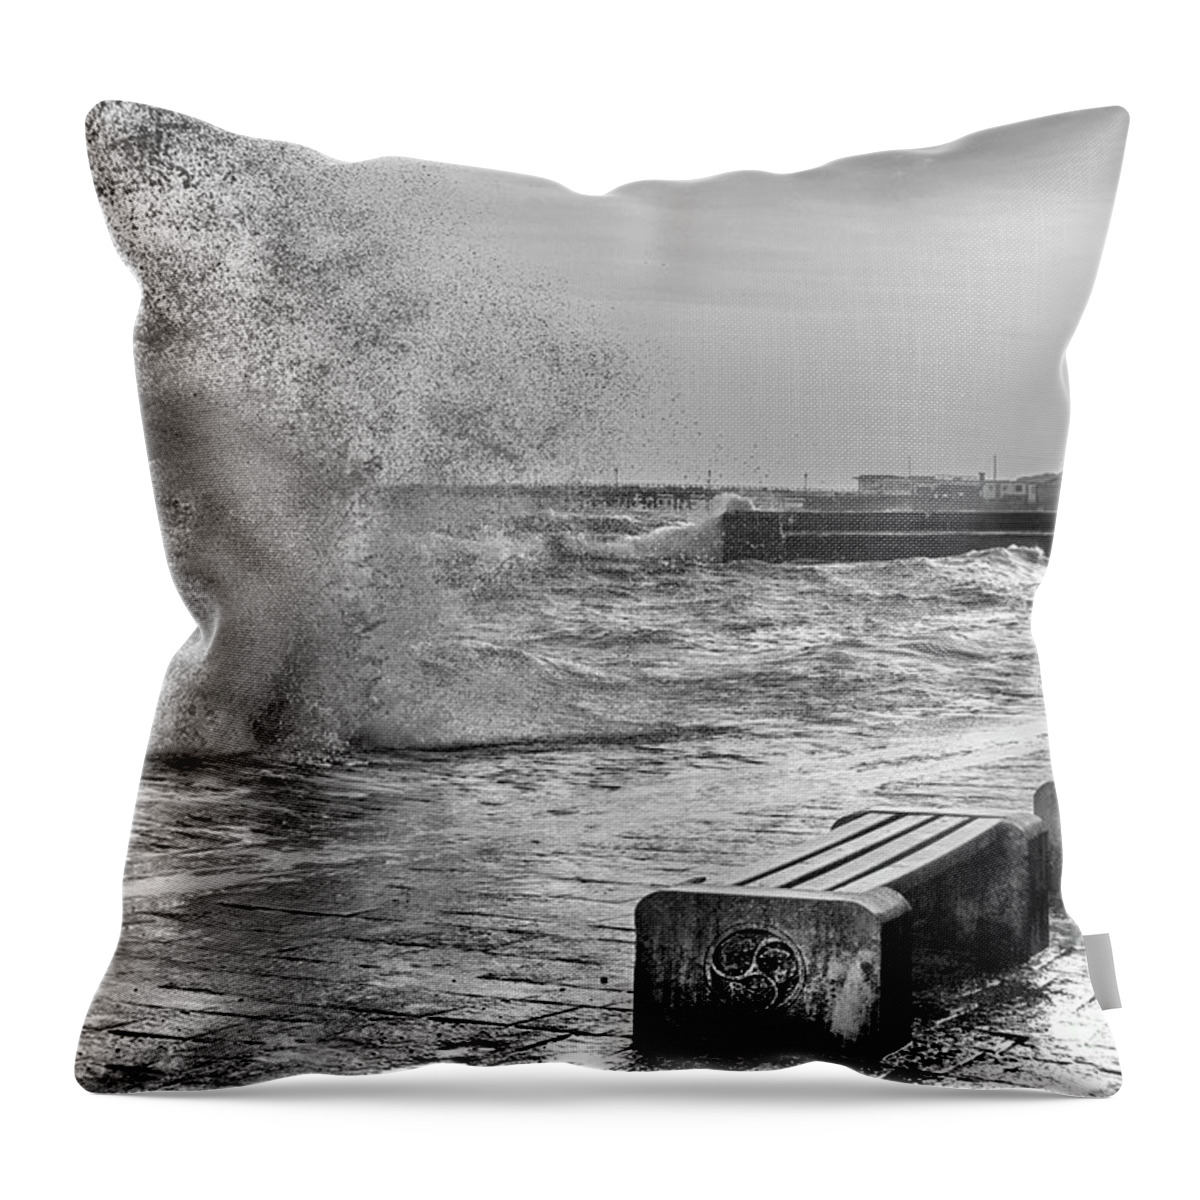 Rough Seas Throw Pillow featuring the photograph Swanage Storm by Linsey Williams